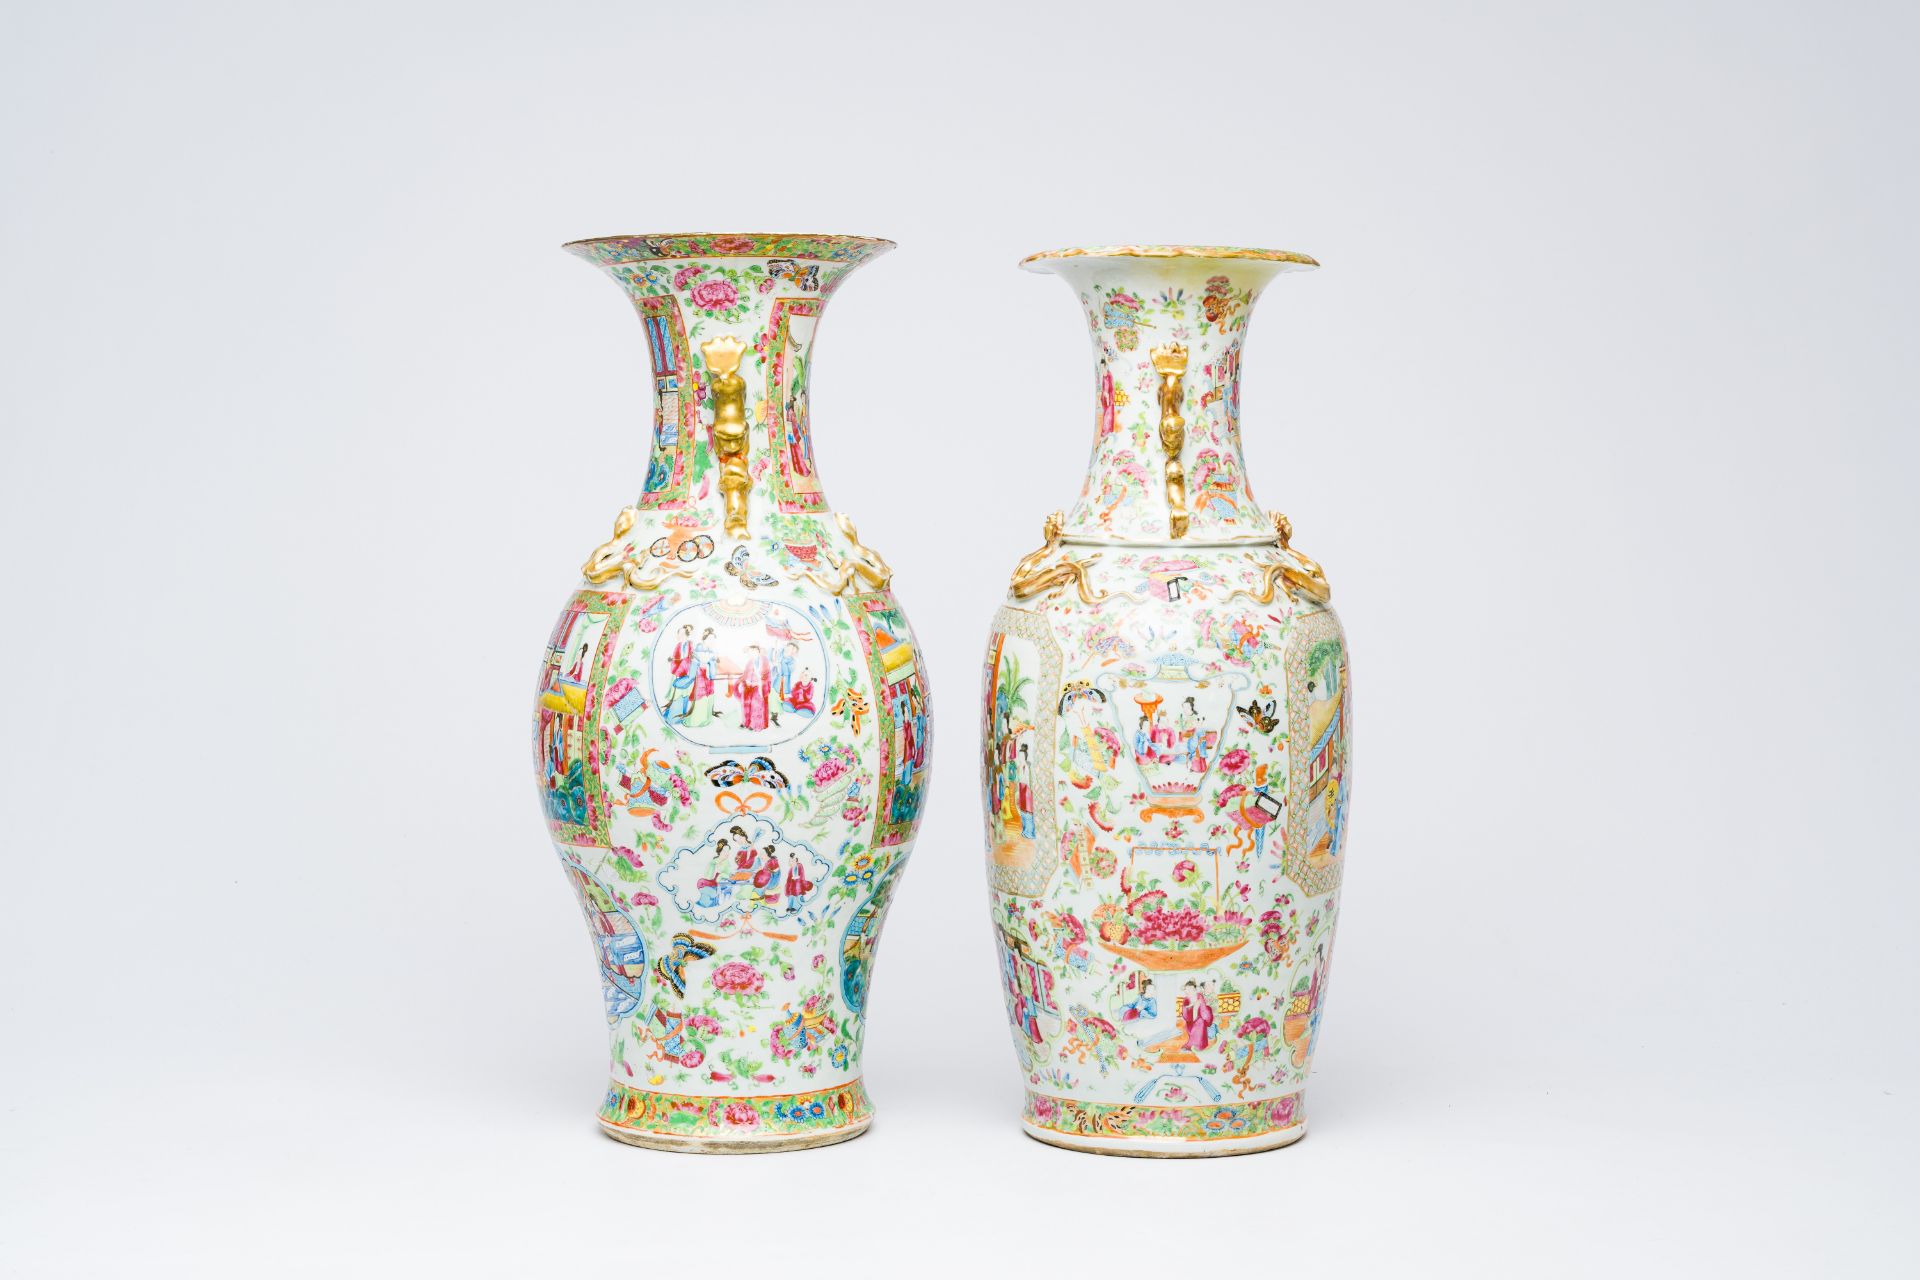 Two Chinese Canton famille rose vases with palace scenes and floral design, 19th C. - Image 3 of 9